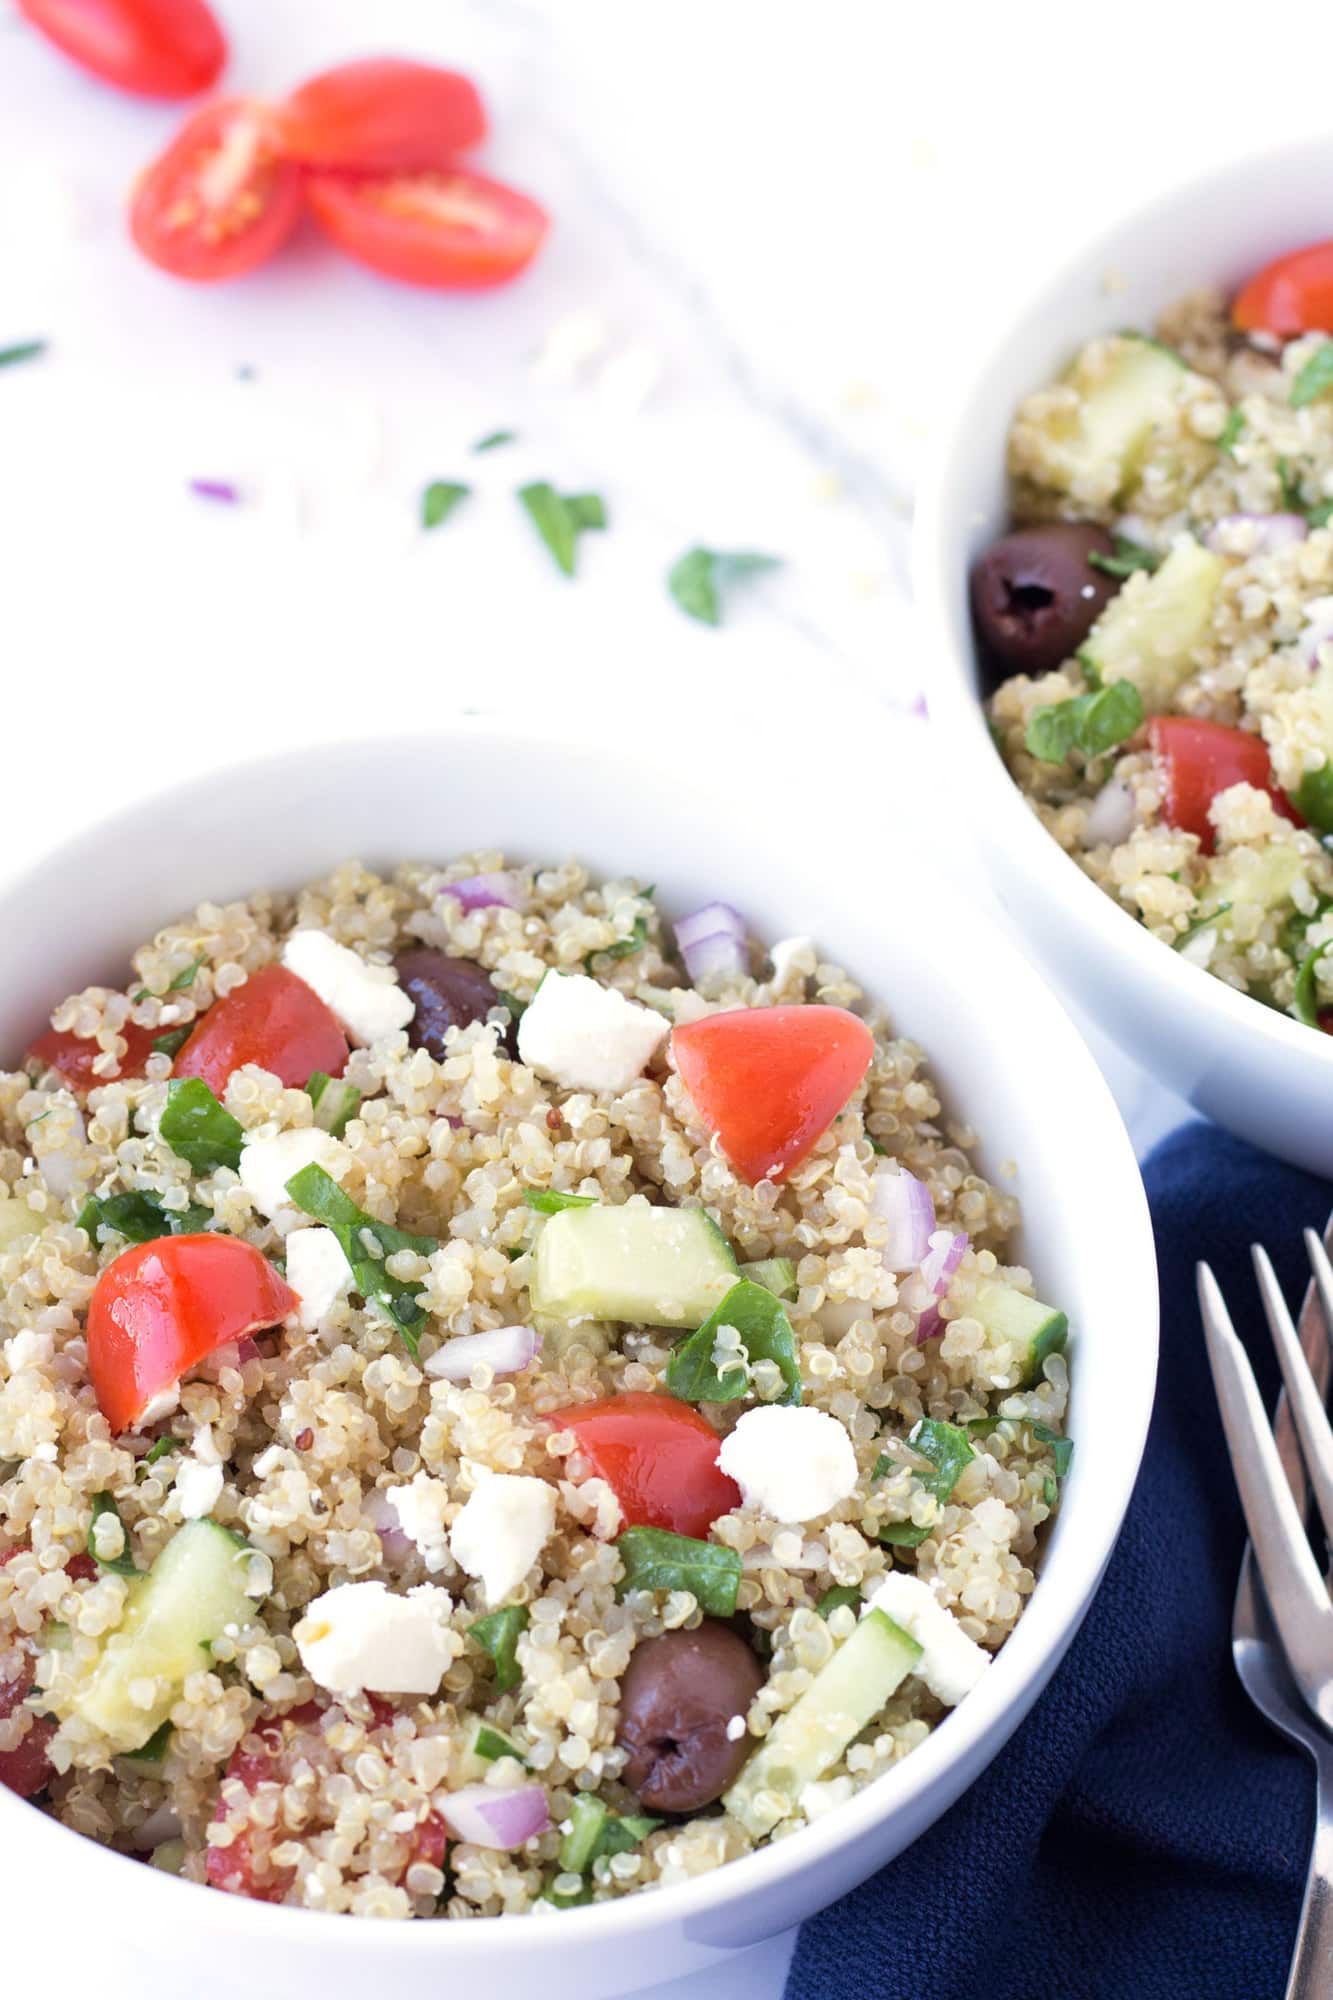 Feta cheese, tomatoes, olives, cucumbers and quinoa in a bowl.